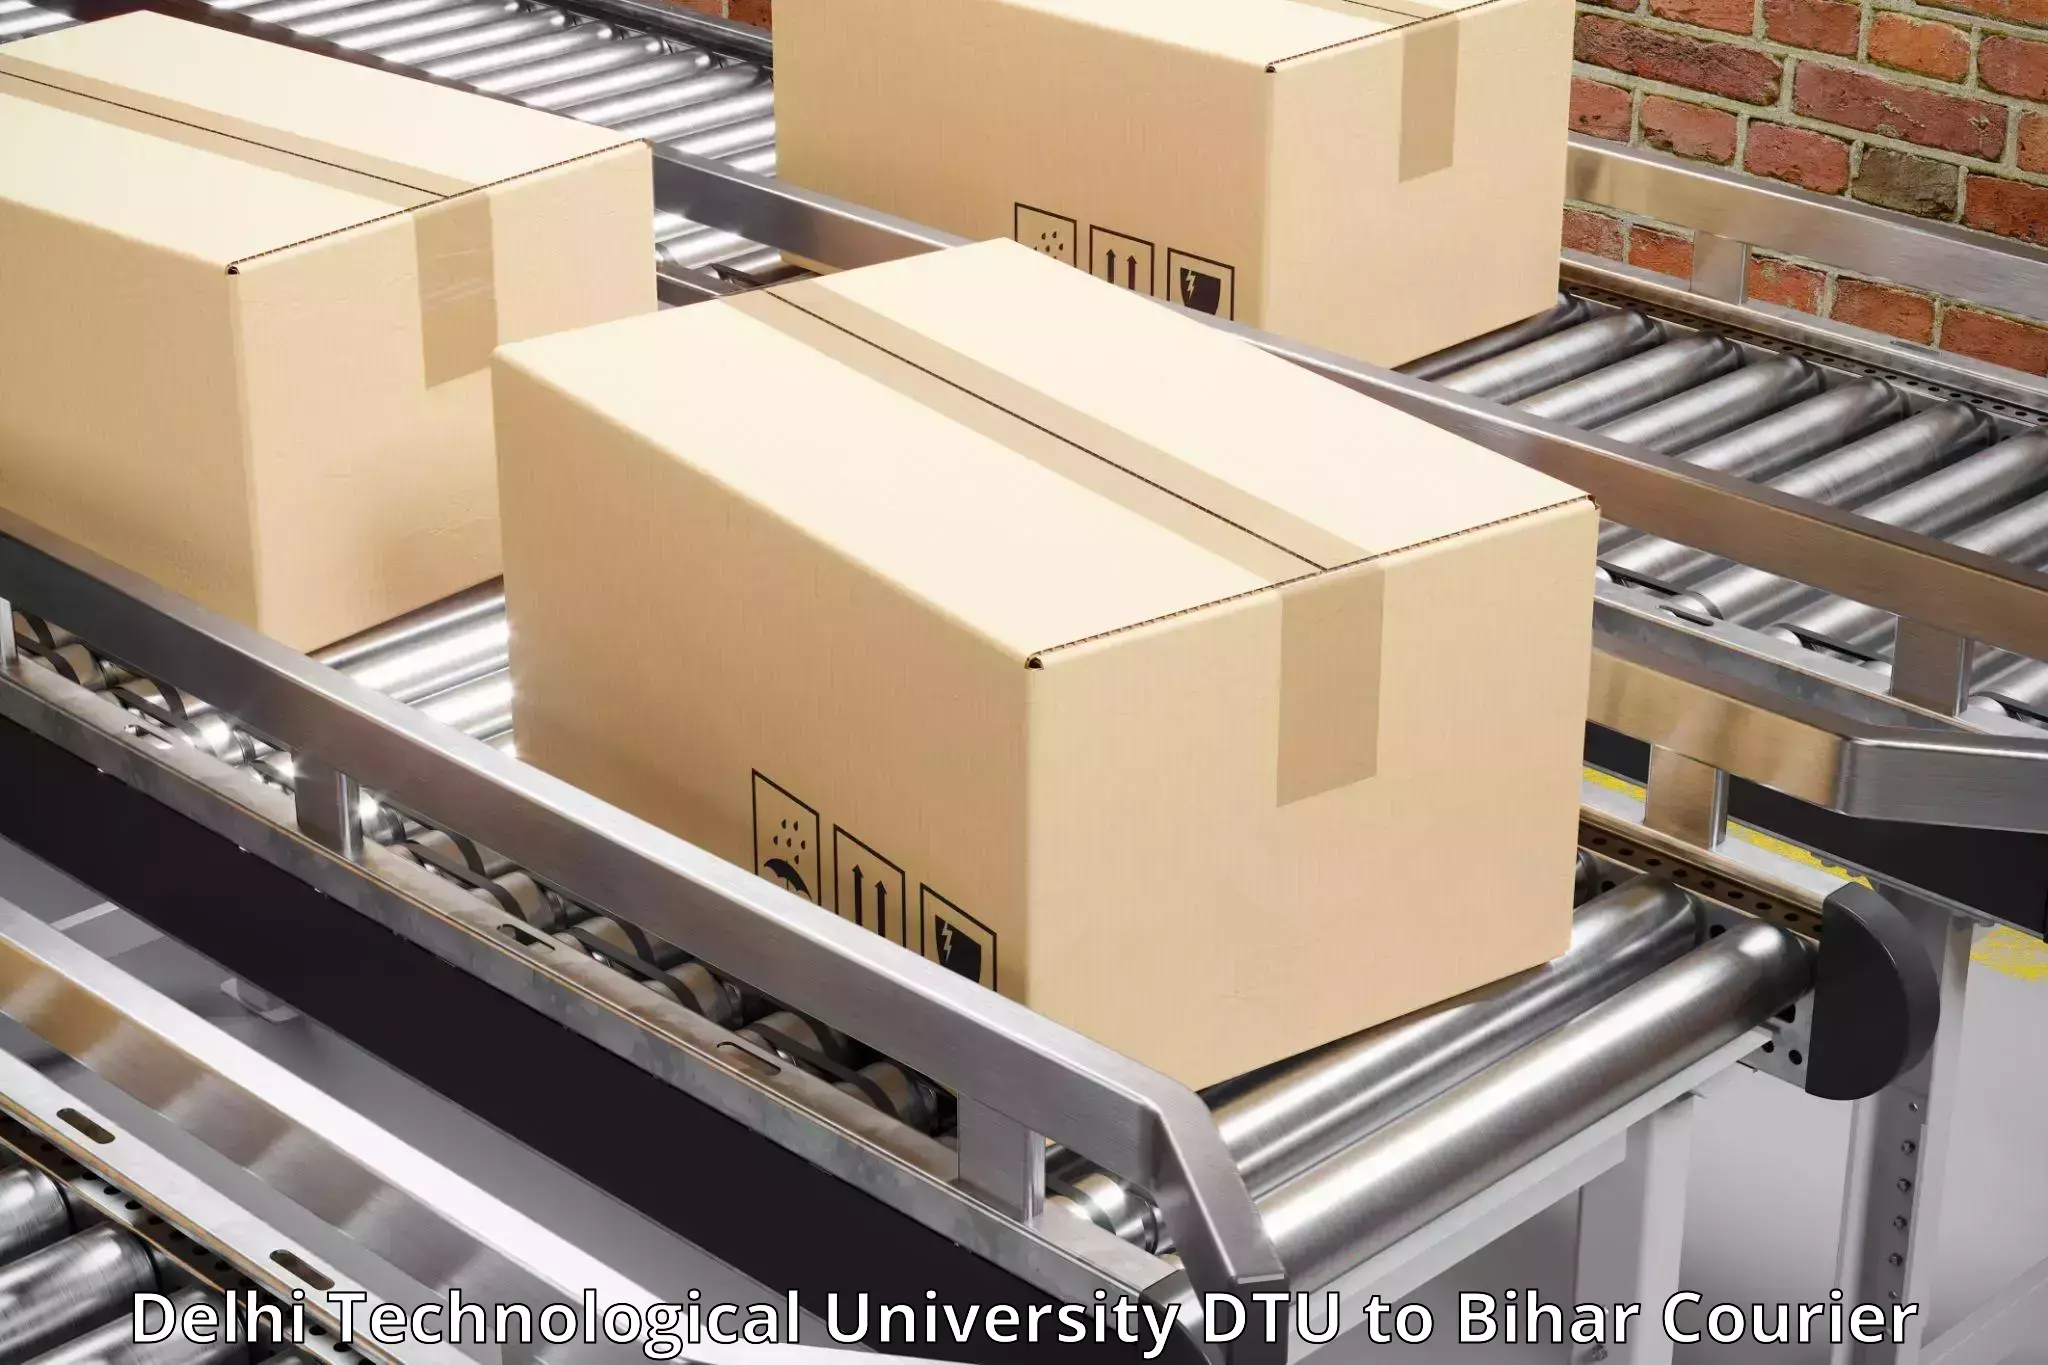 State-of-the-art courier technology Delhi Technological University DTU to Baniapur